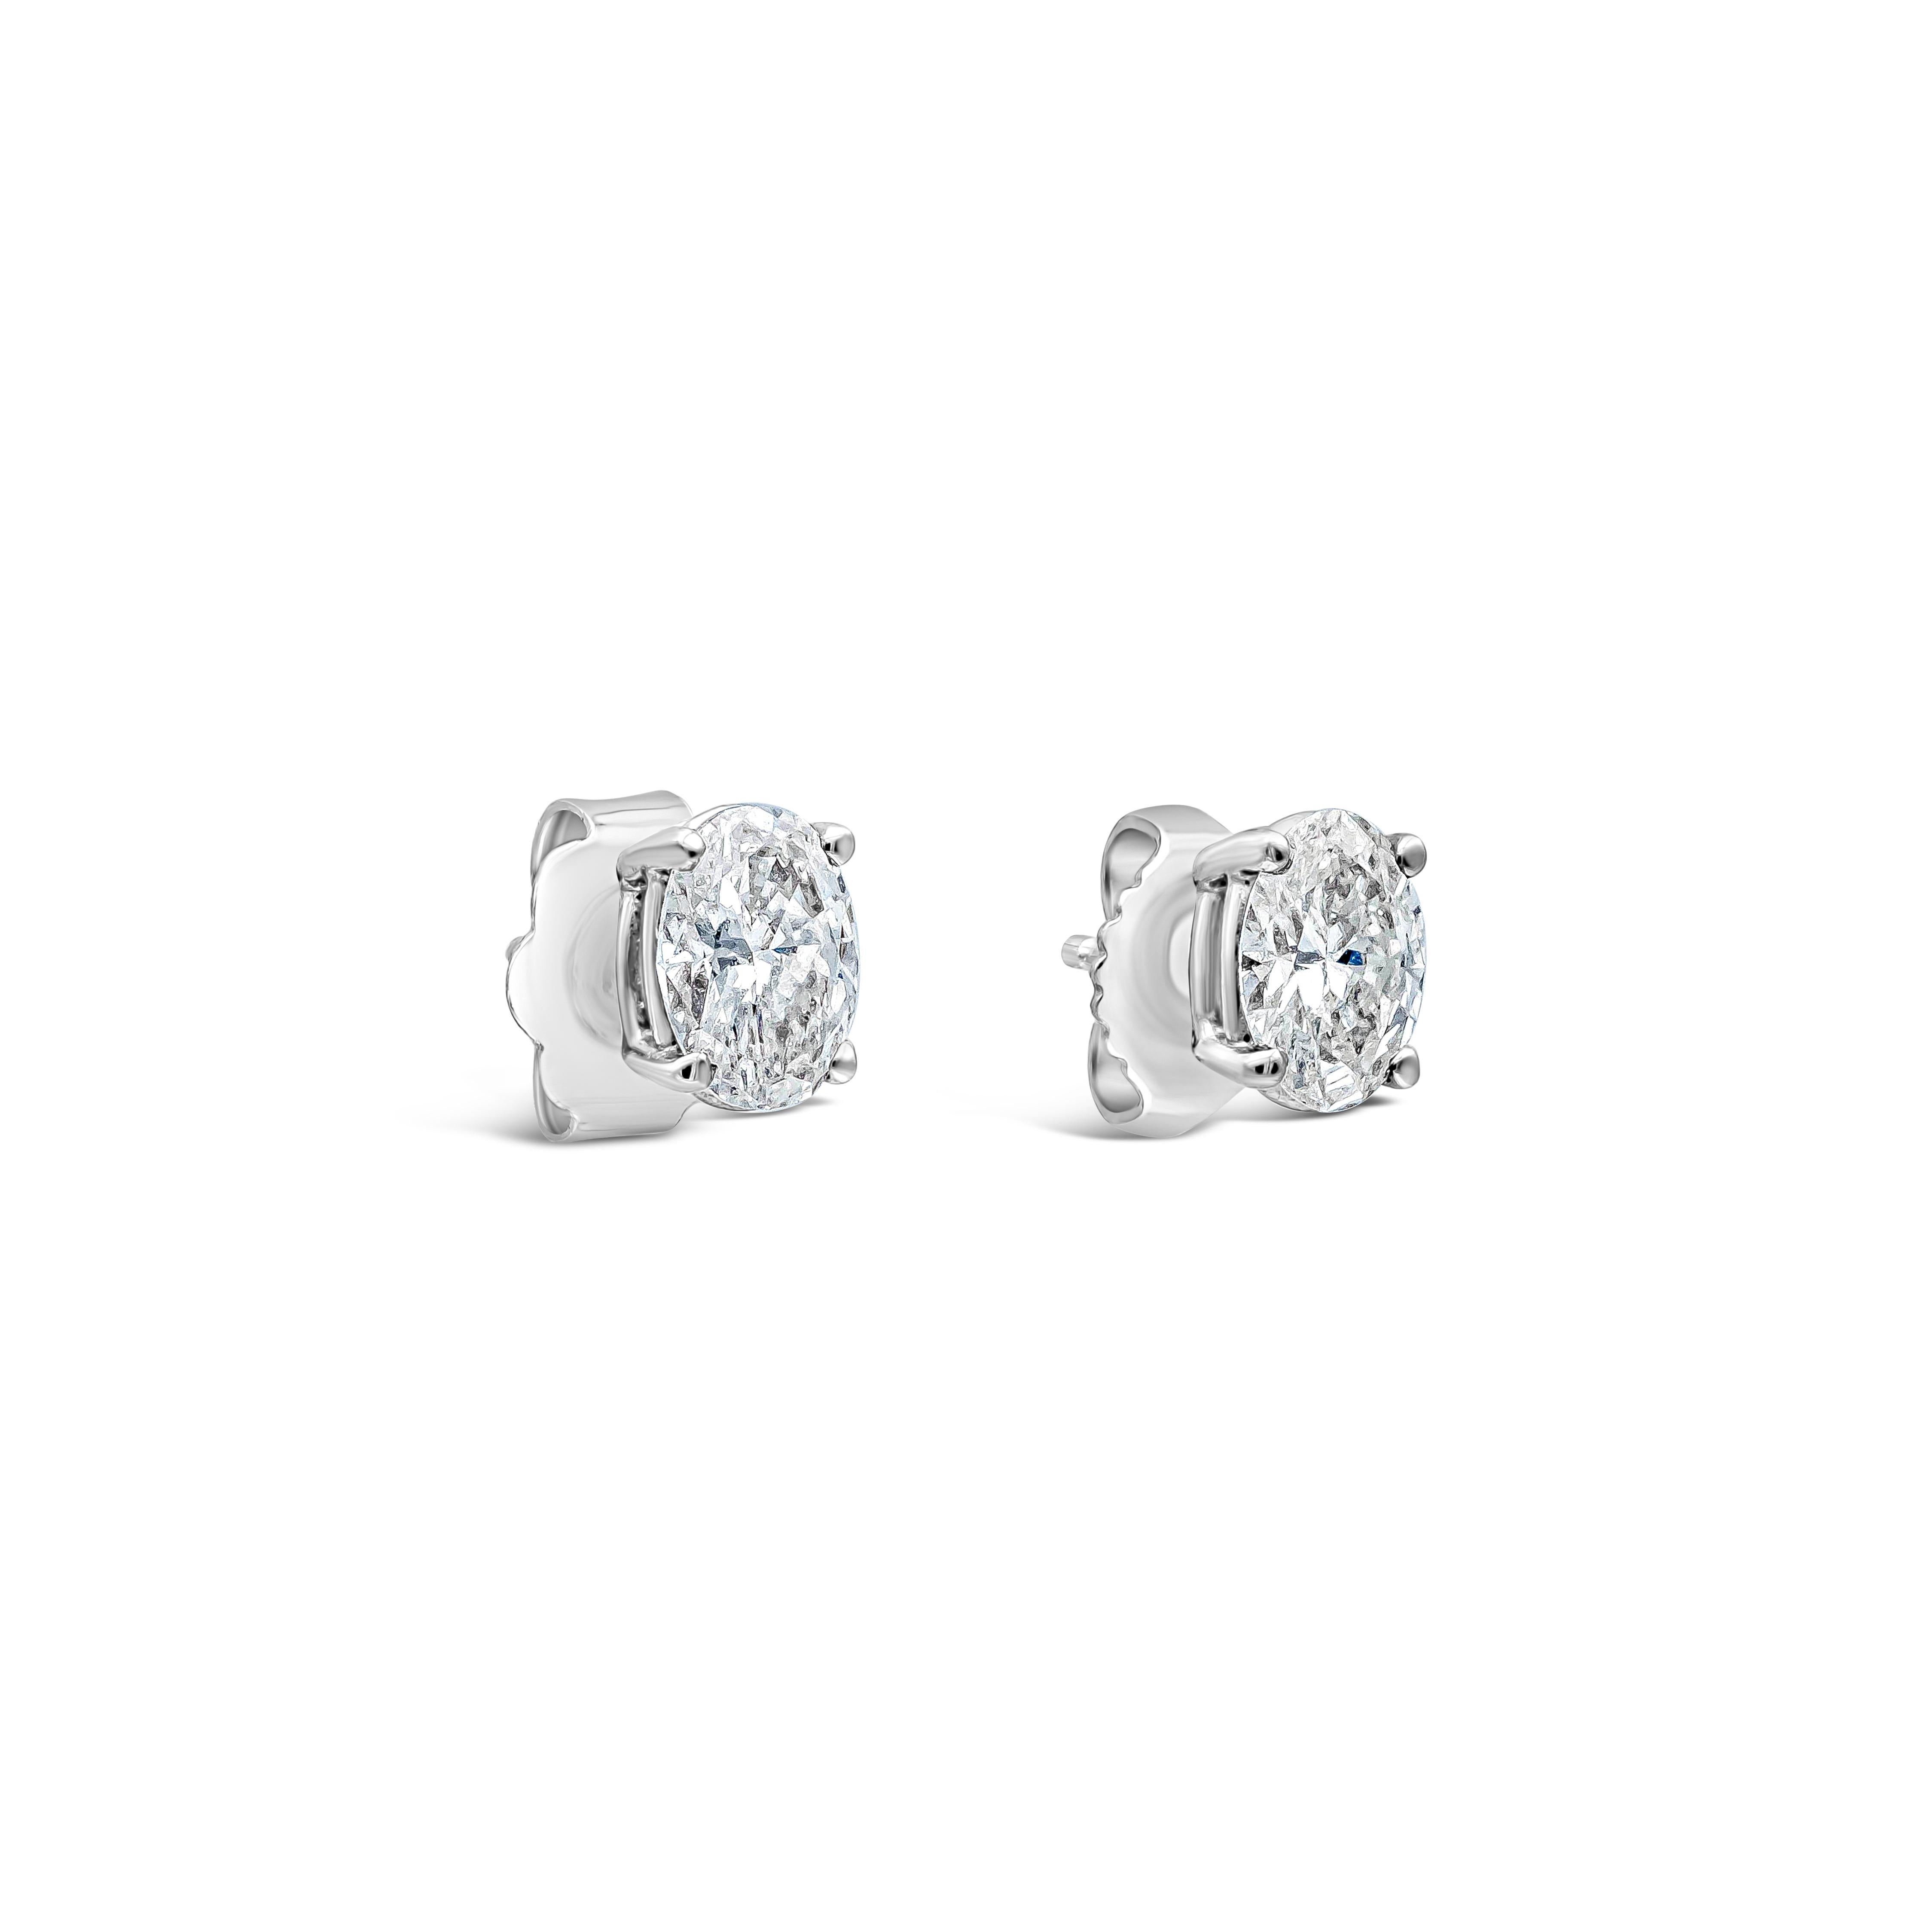 Stud earrings are forever elegant and timeless. Features a 0.95 carat total brilliant oval cut diamond set in a 4 prong 14 karat white gold basket. Approximately G-H color, VS clarity.

Style available in different price ranges. Prices are based on